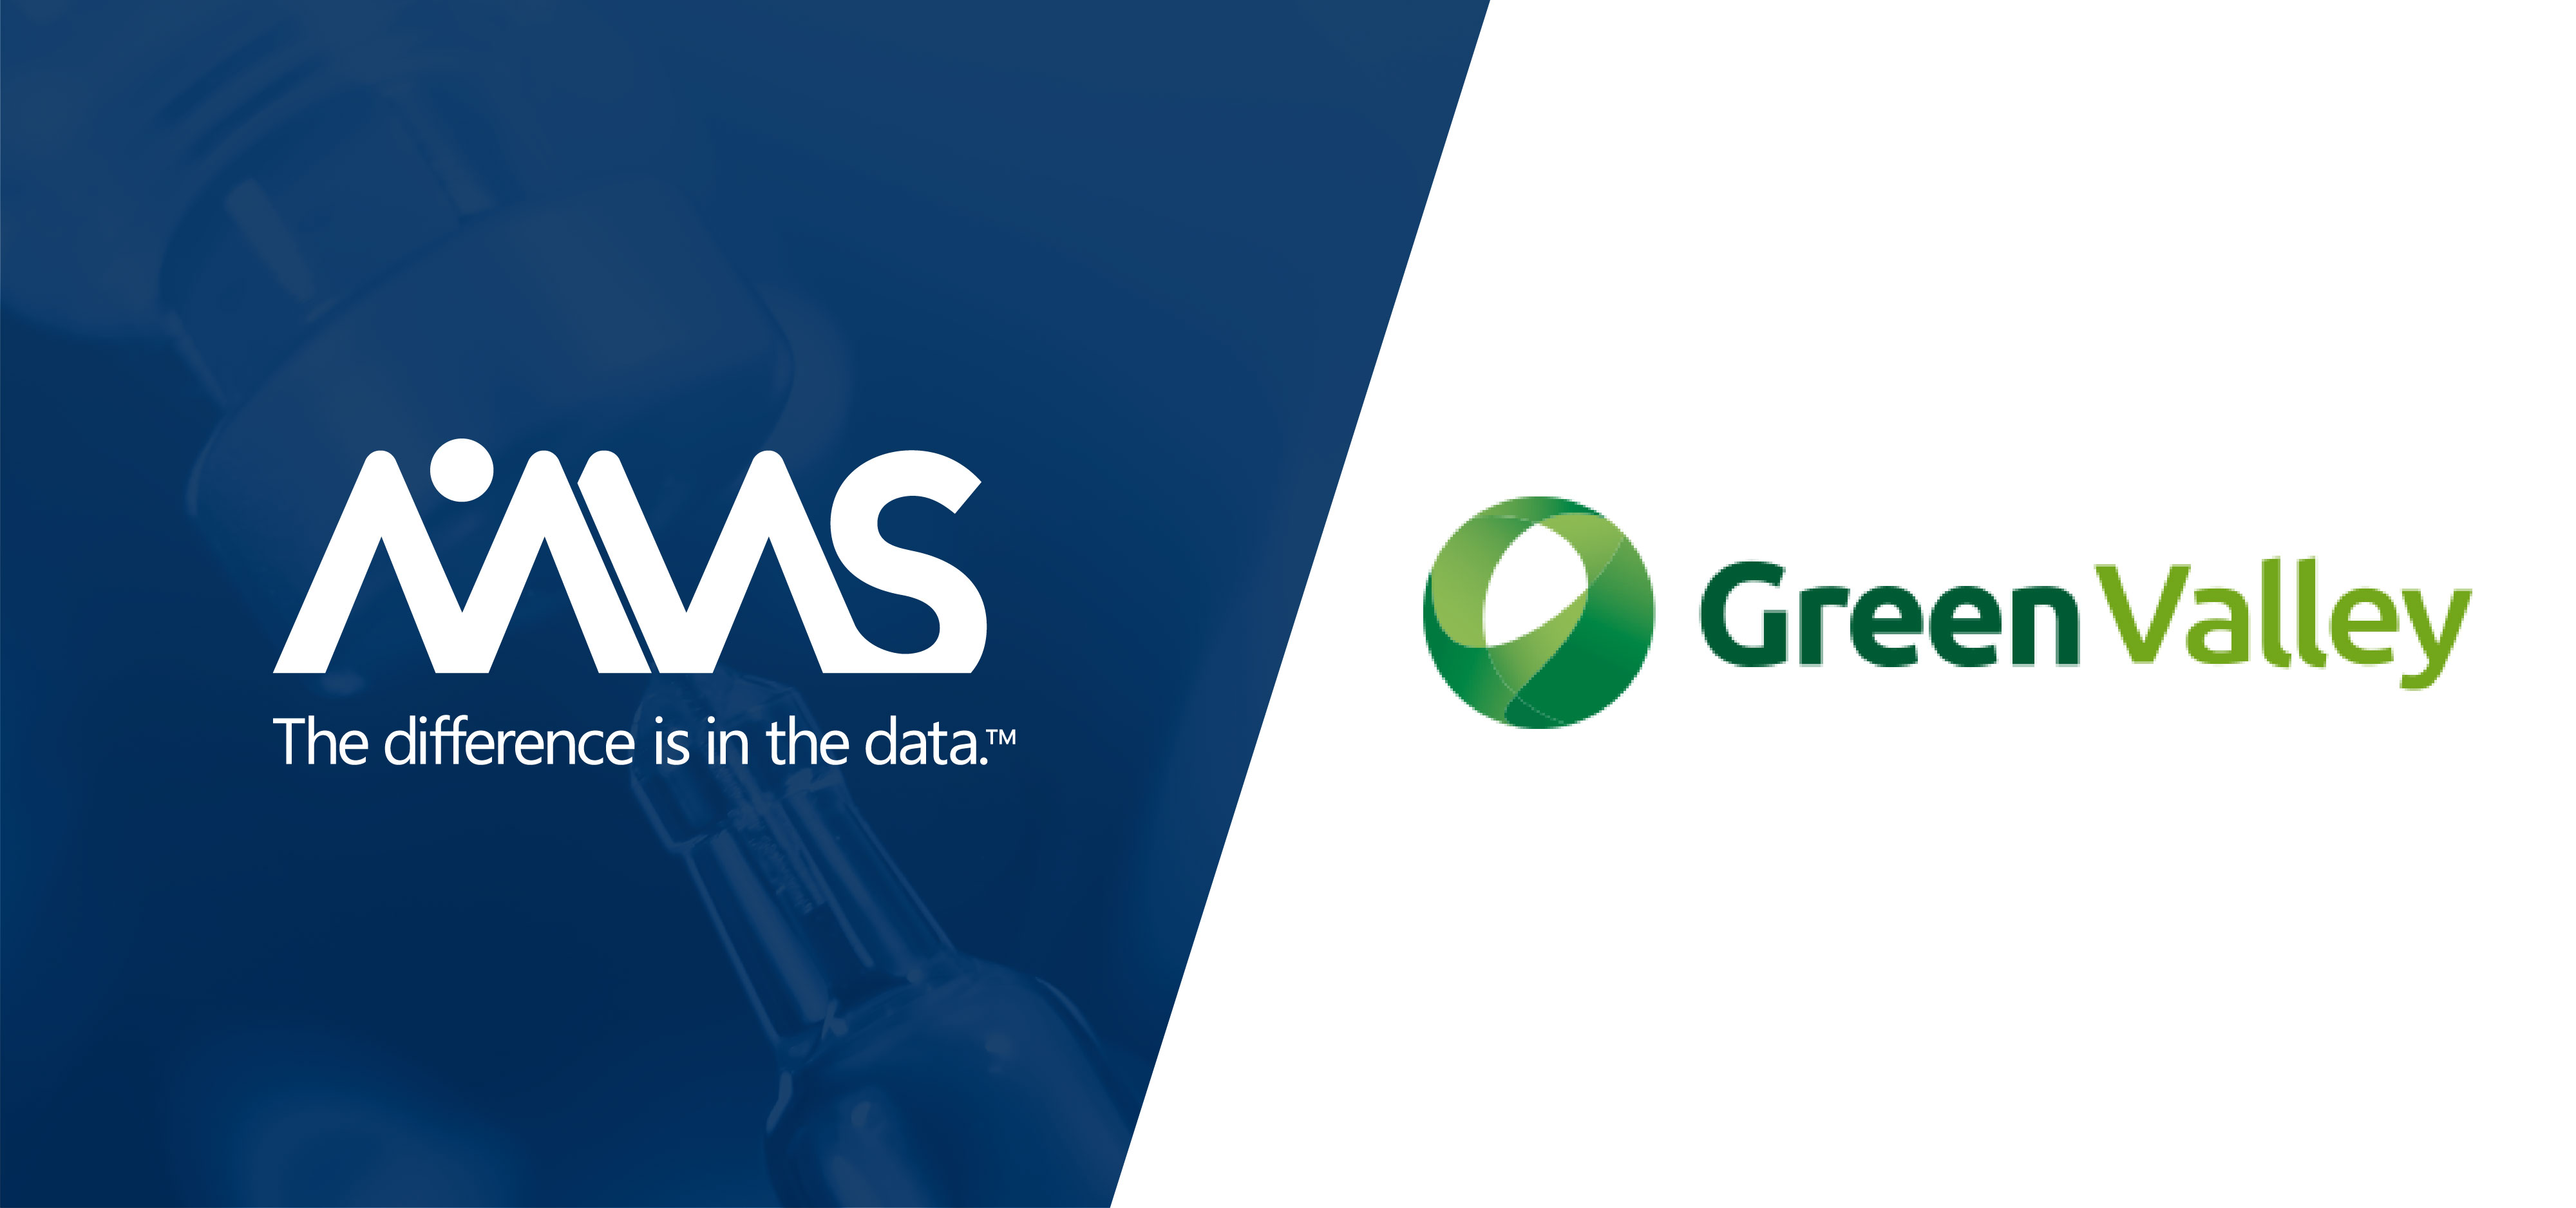 GREEN VALLEY PHARMACEUTICAL AND MMS HOLDINGS COLLABORATE TO GAIN FDA APPROVAL TO BEGIN CLINICAL TRIALS FOR THE FIRST ALZHEIMER’S DRUG IN 17 YEARS